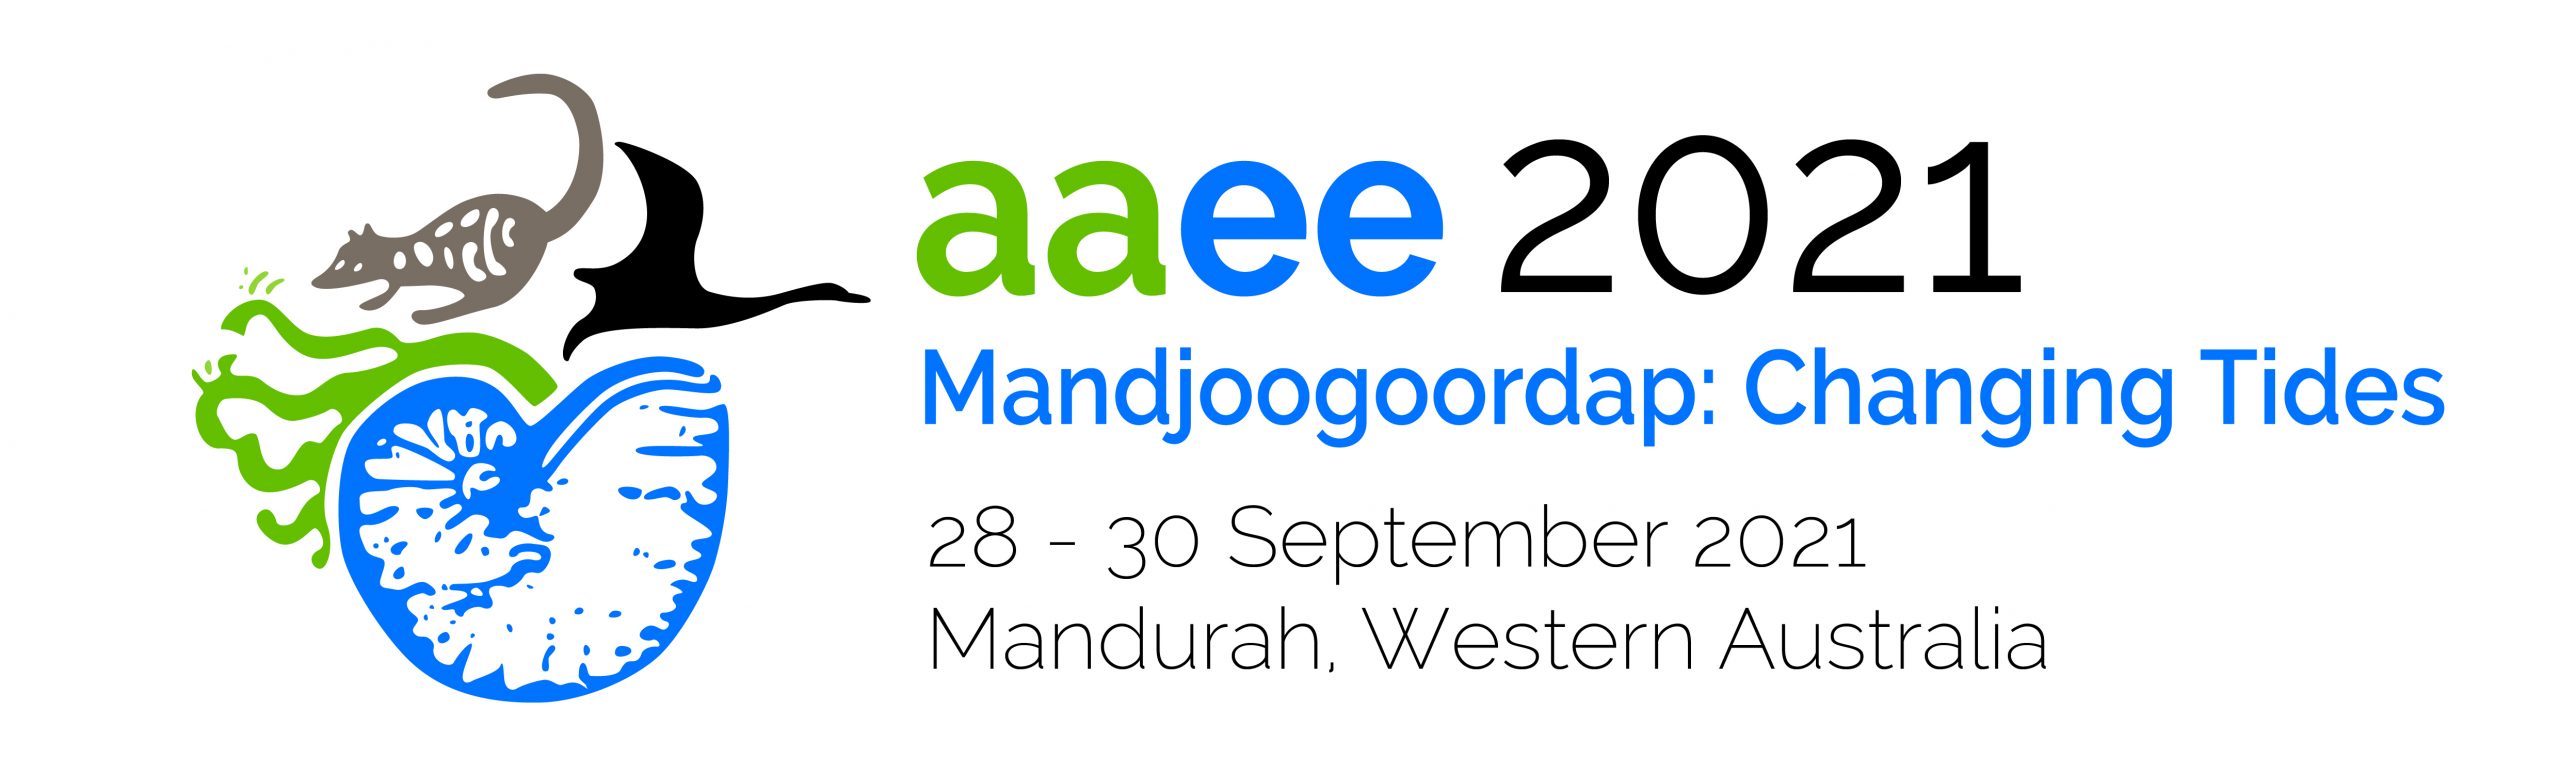 AAEE Conference 2021